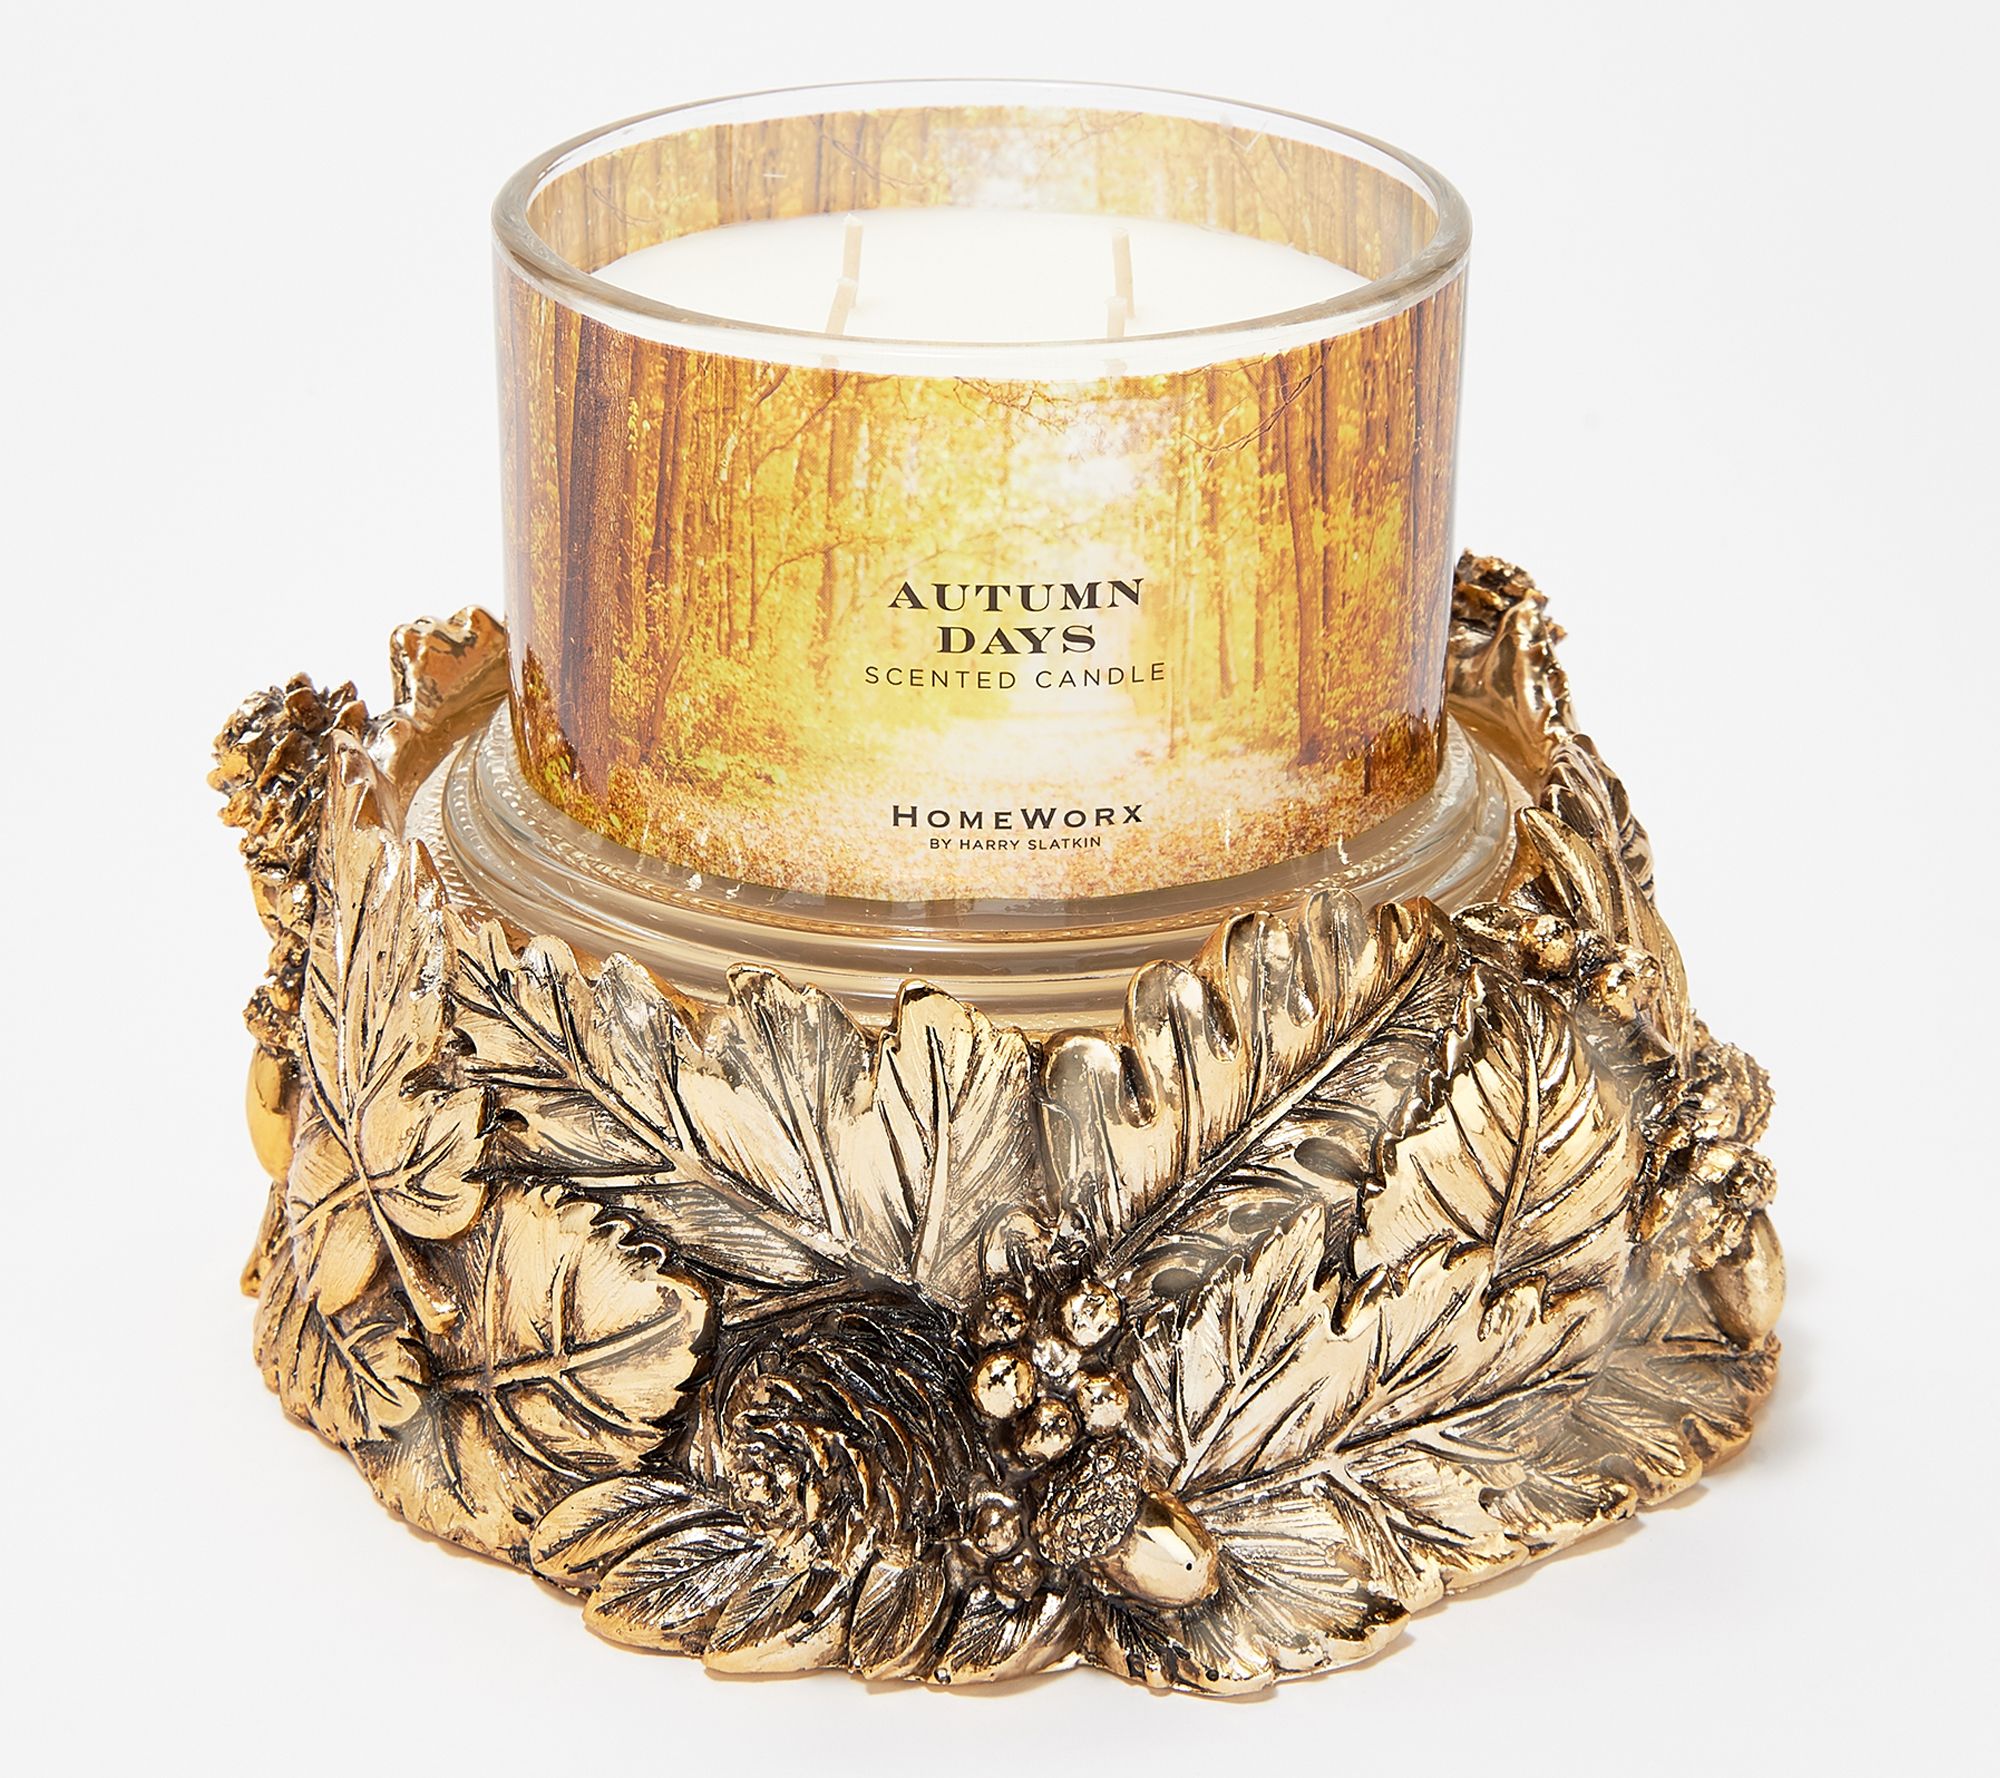 Cozy up your home with a fall foliage pedestal candle